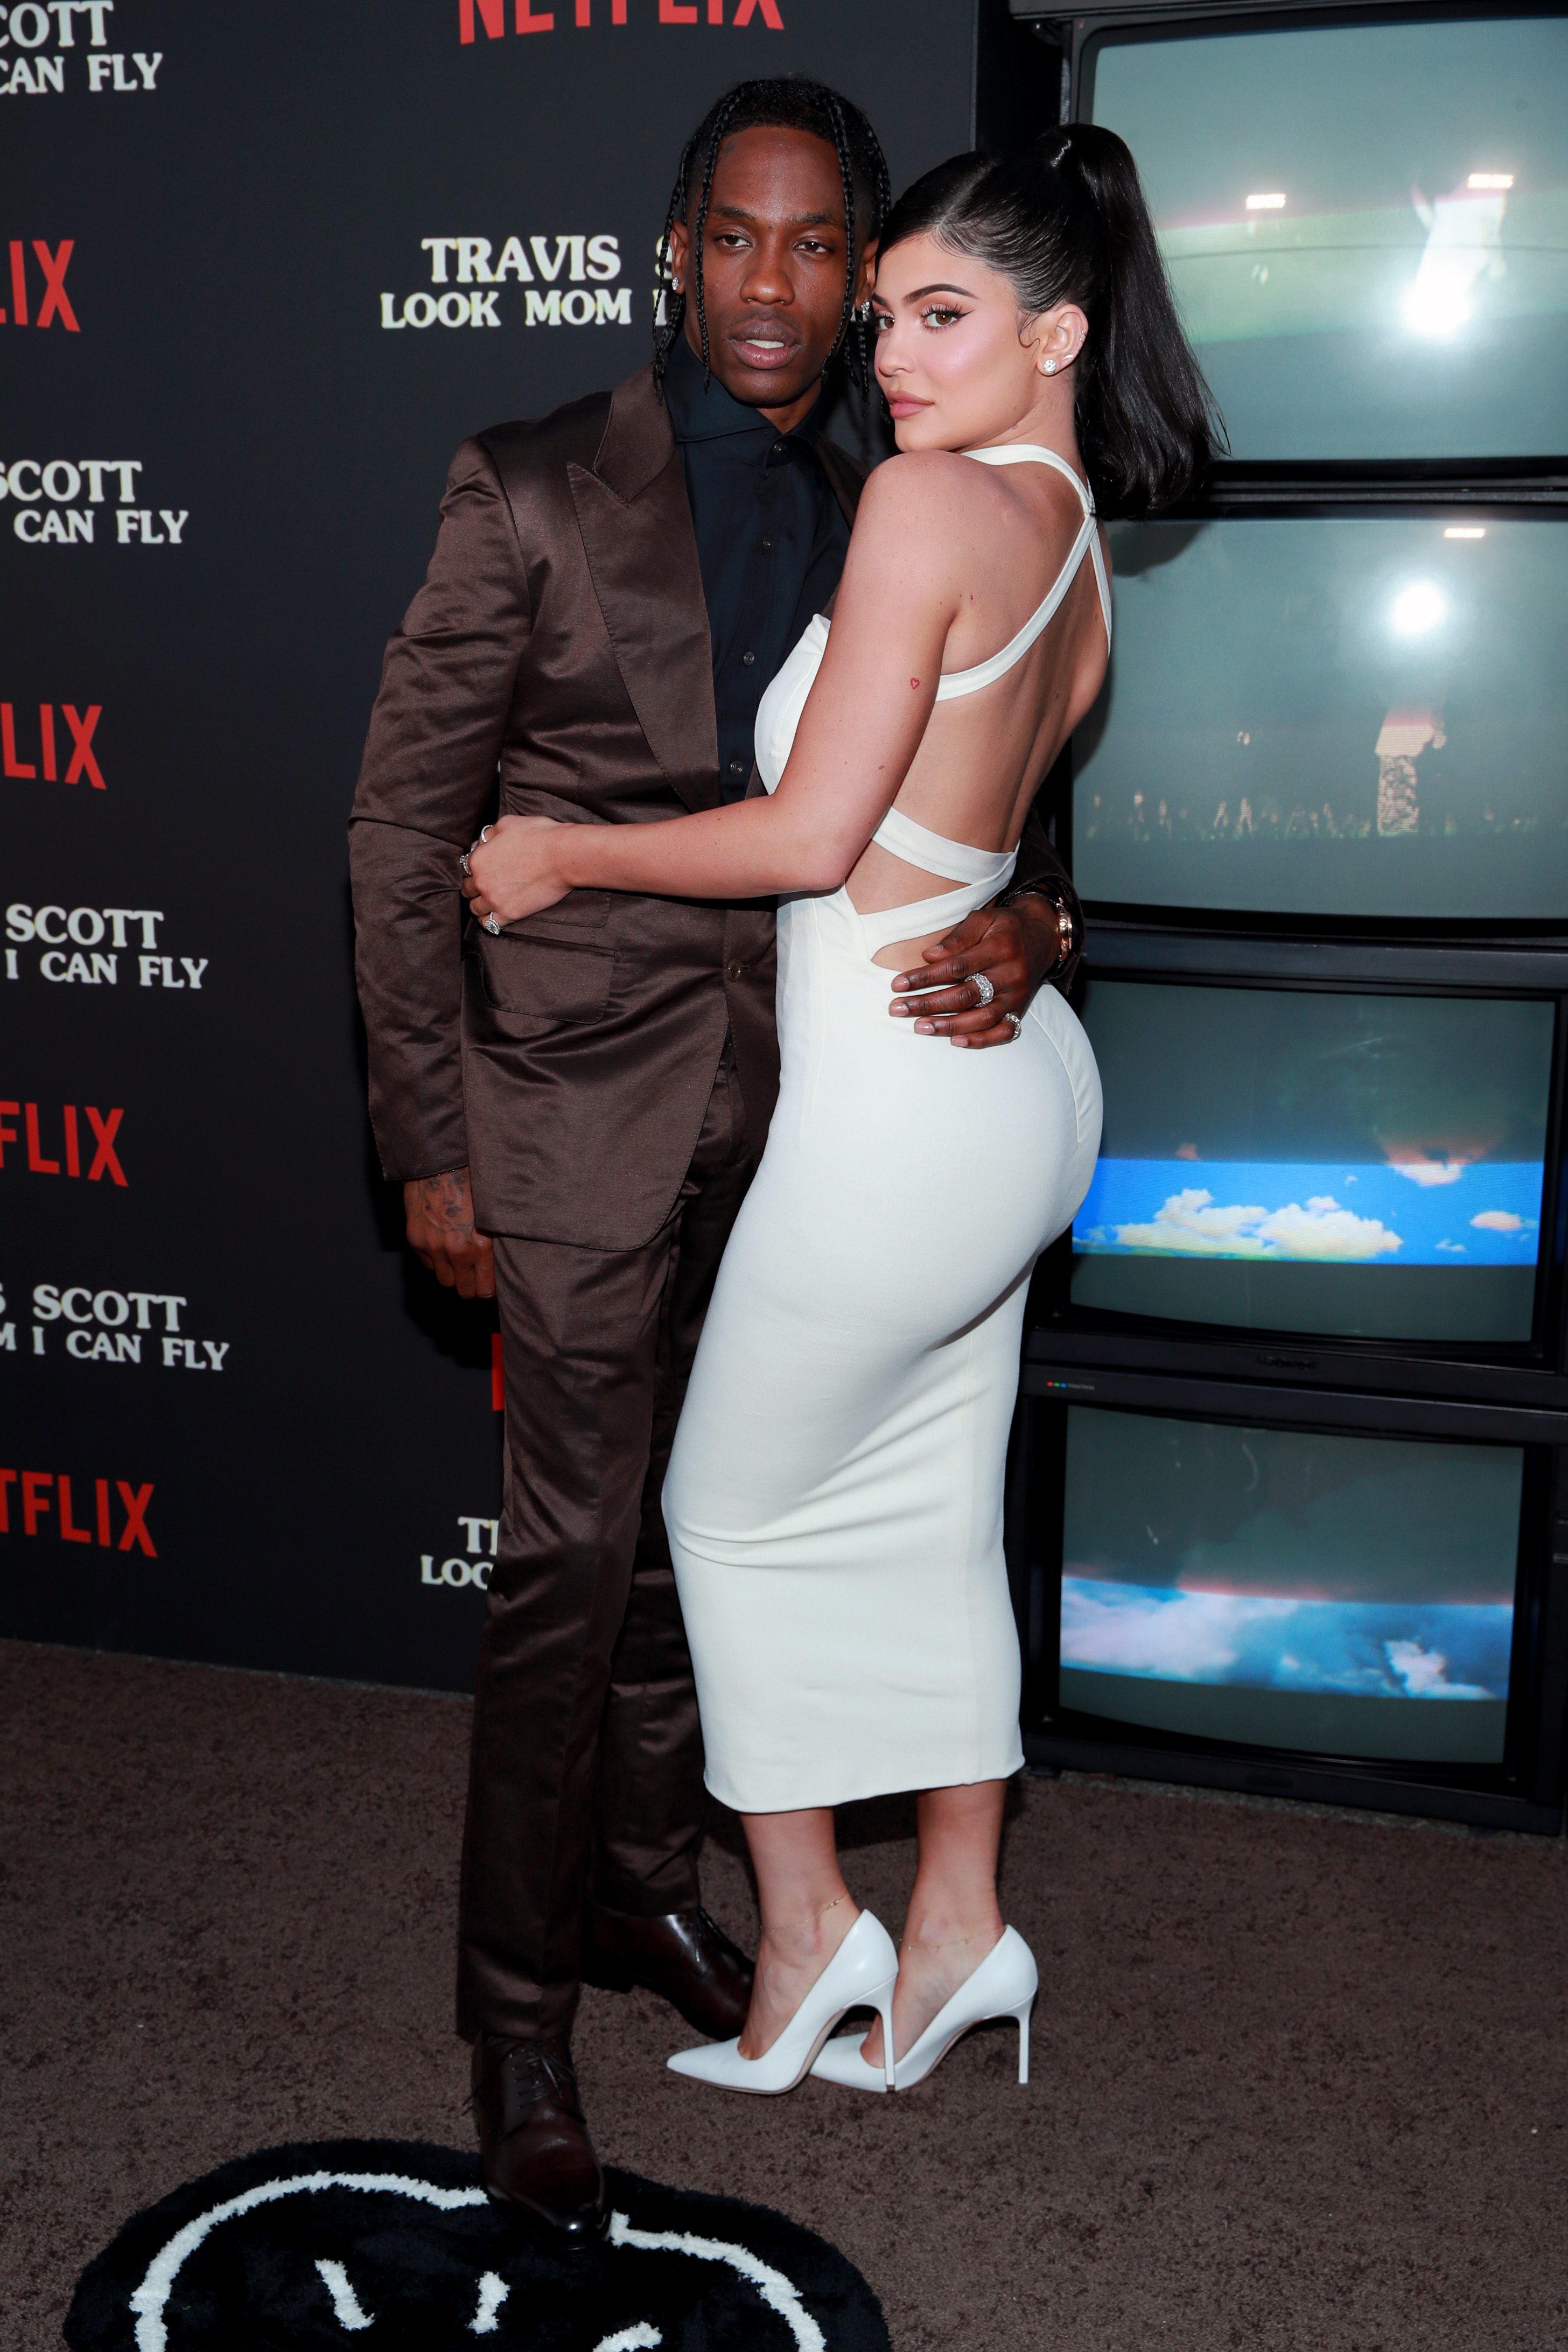 SANTA MONICA, CALIFORNIA - AUGUST 27: (L-R) Travis Scott and Kylie Jenner attend the premiere of Netflix's "Travis Scott: Look Mom I Can Fly" at Barker Hangar on August 27, 2019 in Santa Monica, California. (Photo by Rich Fury/Getty Images)